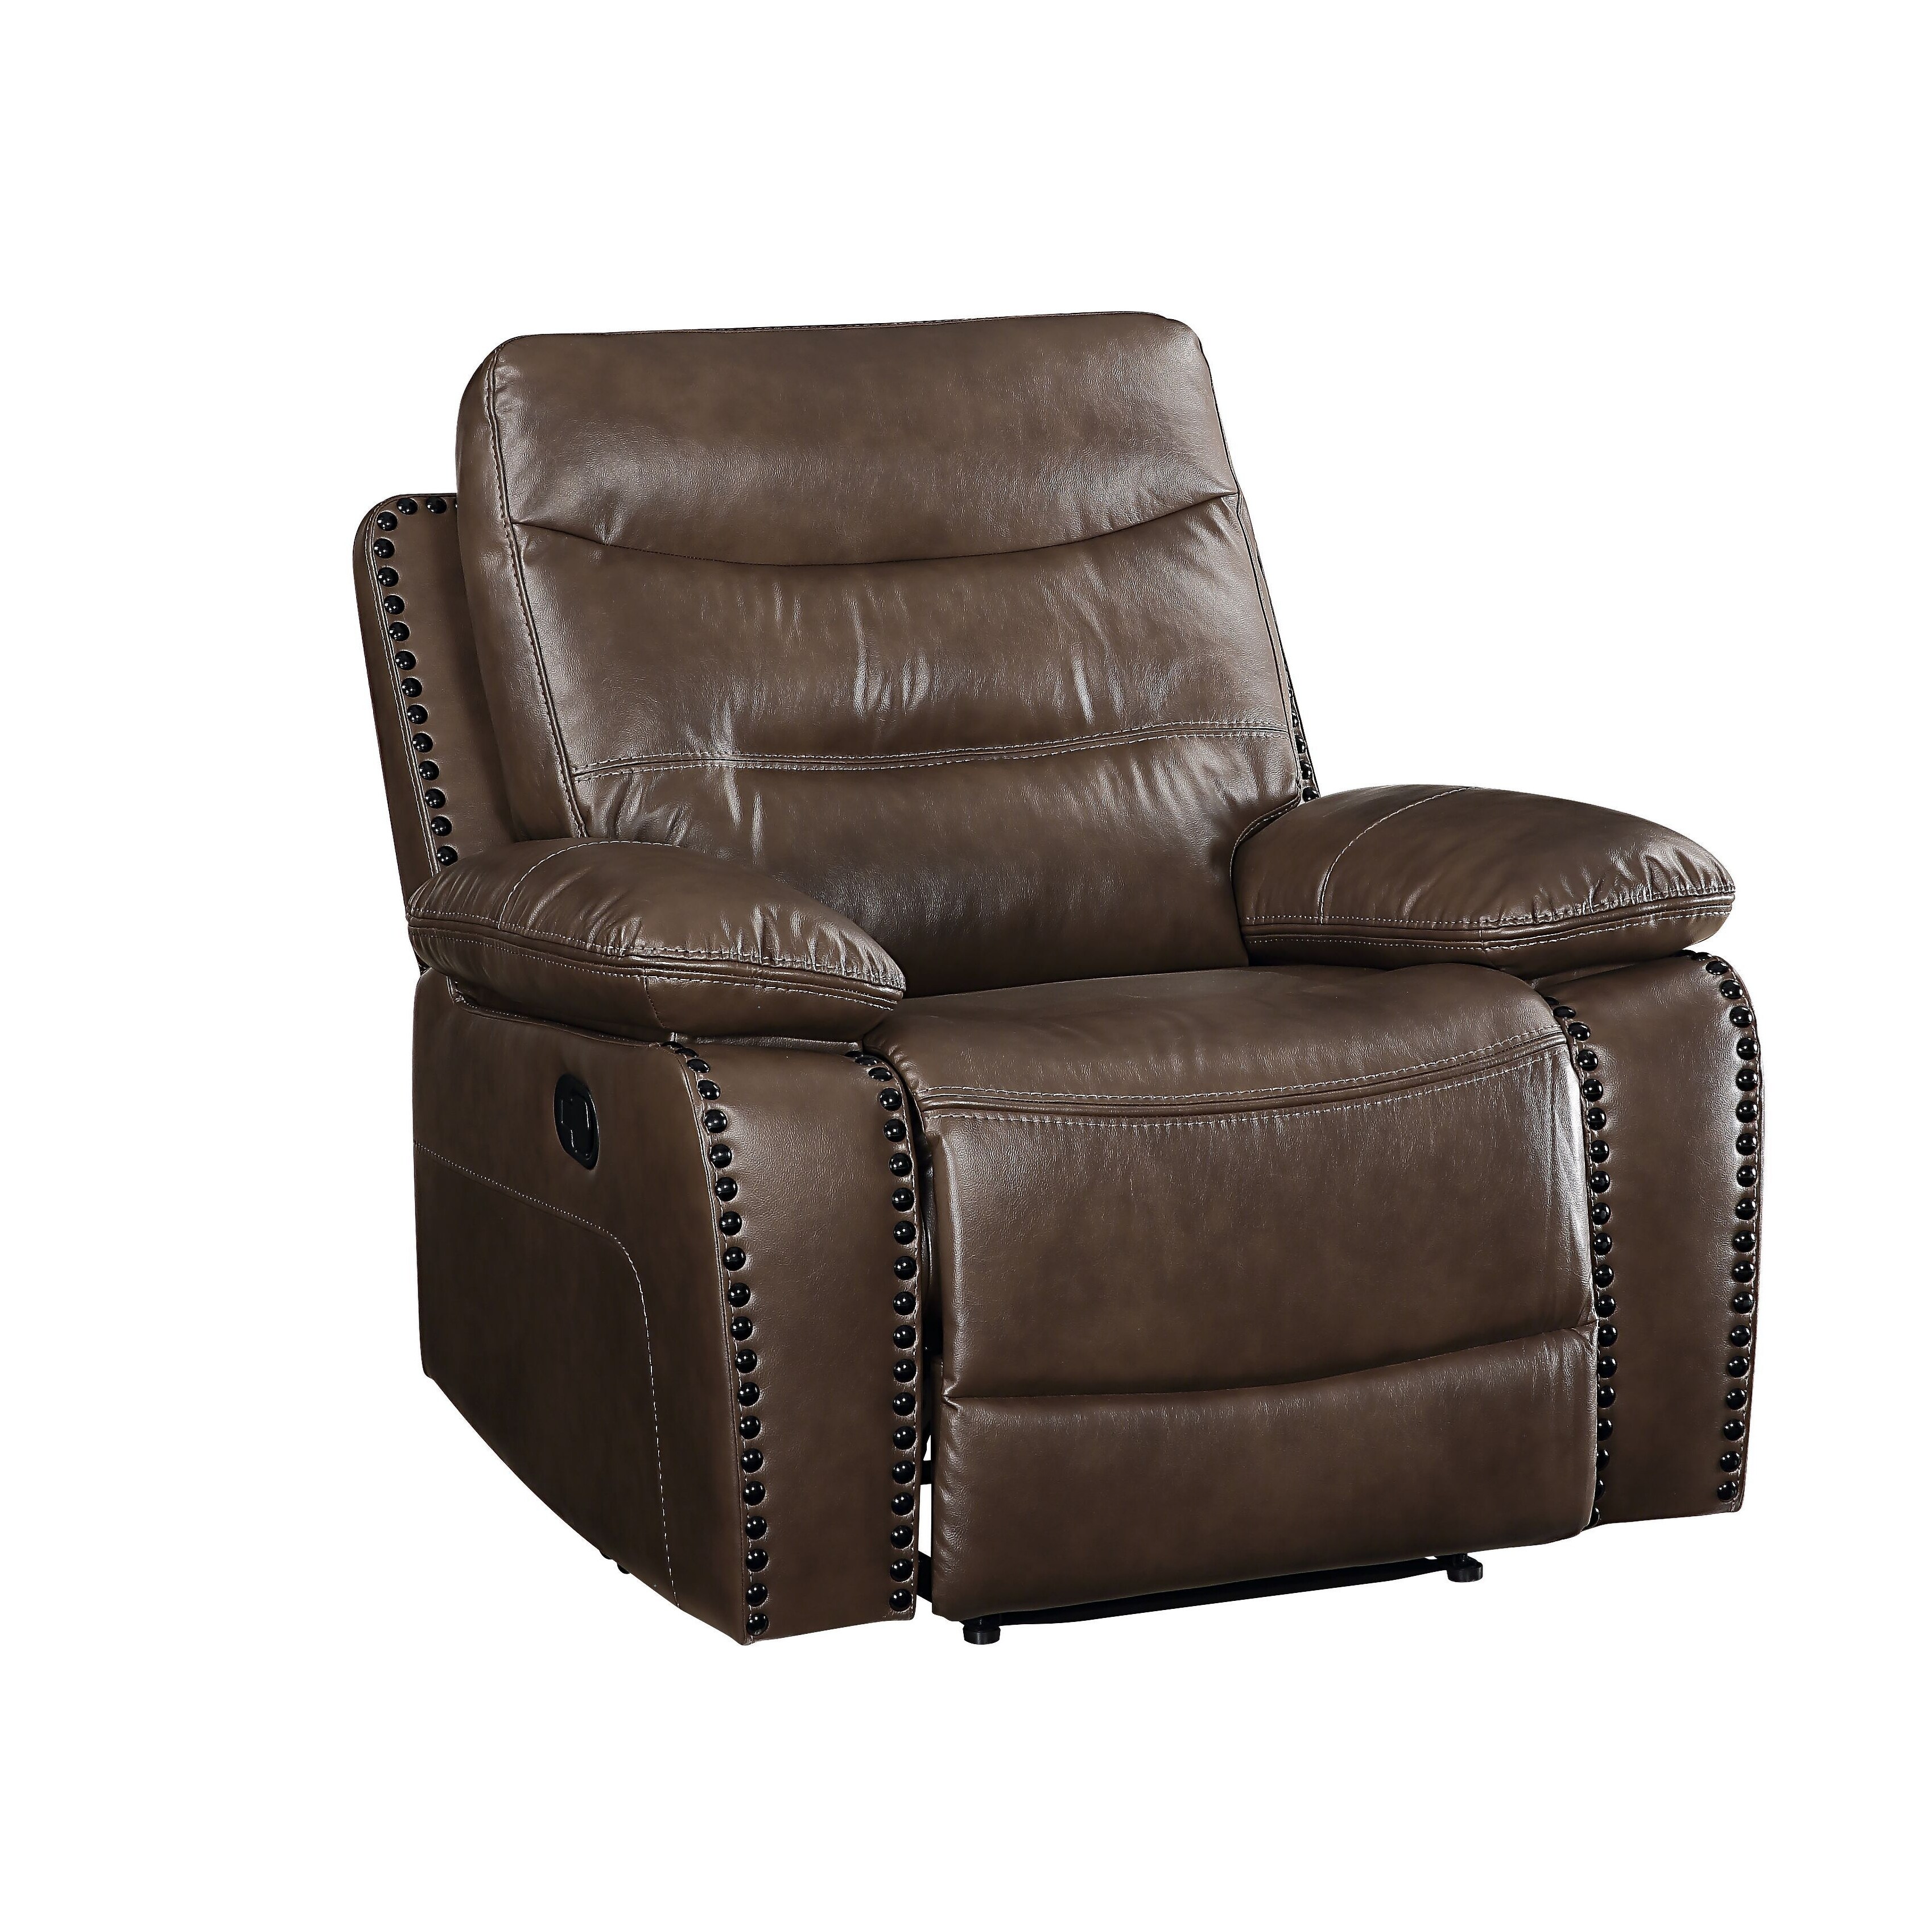 https://ak1.ostkcdn.com/images/products/is/images/direct/3b5202c265857c4bb679571099195dd15350e34a/Contemporary-Leather-Motion-Recliner-with-Pillow-Top-Arm%2C-Tight-Cushions.jpg